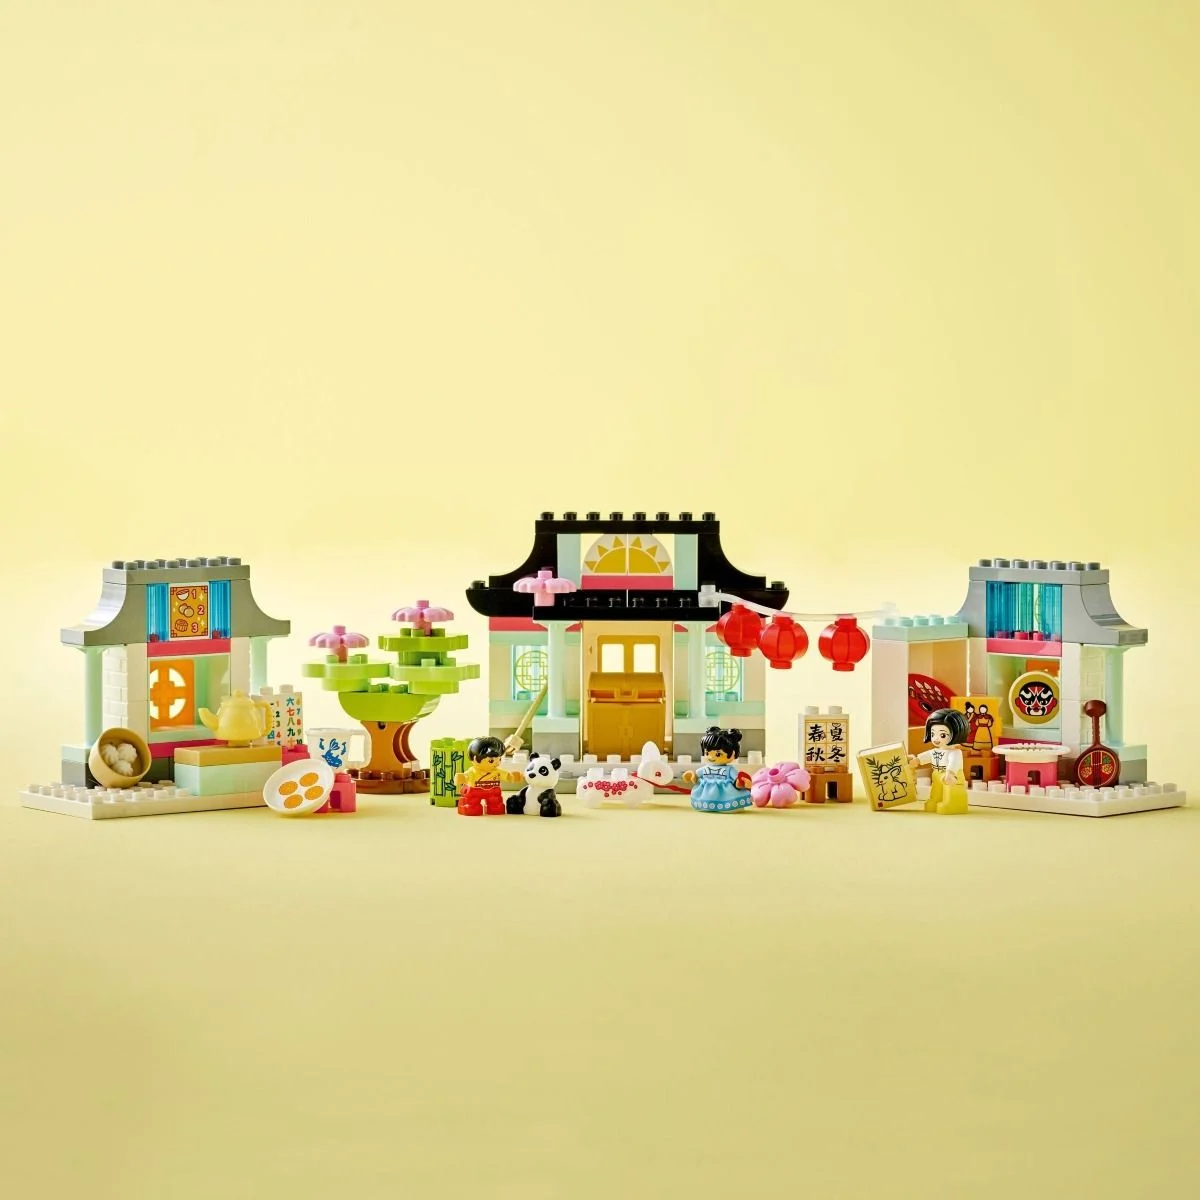 LEGO DUPLO Learn About Chinese Culture